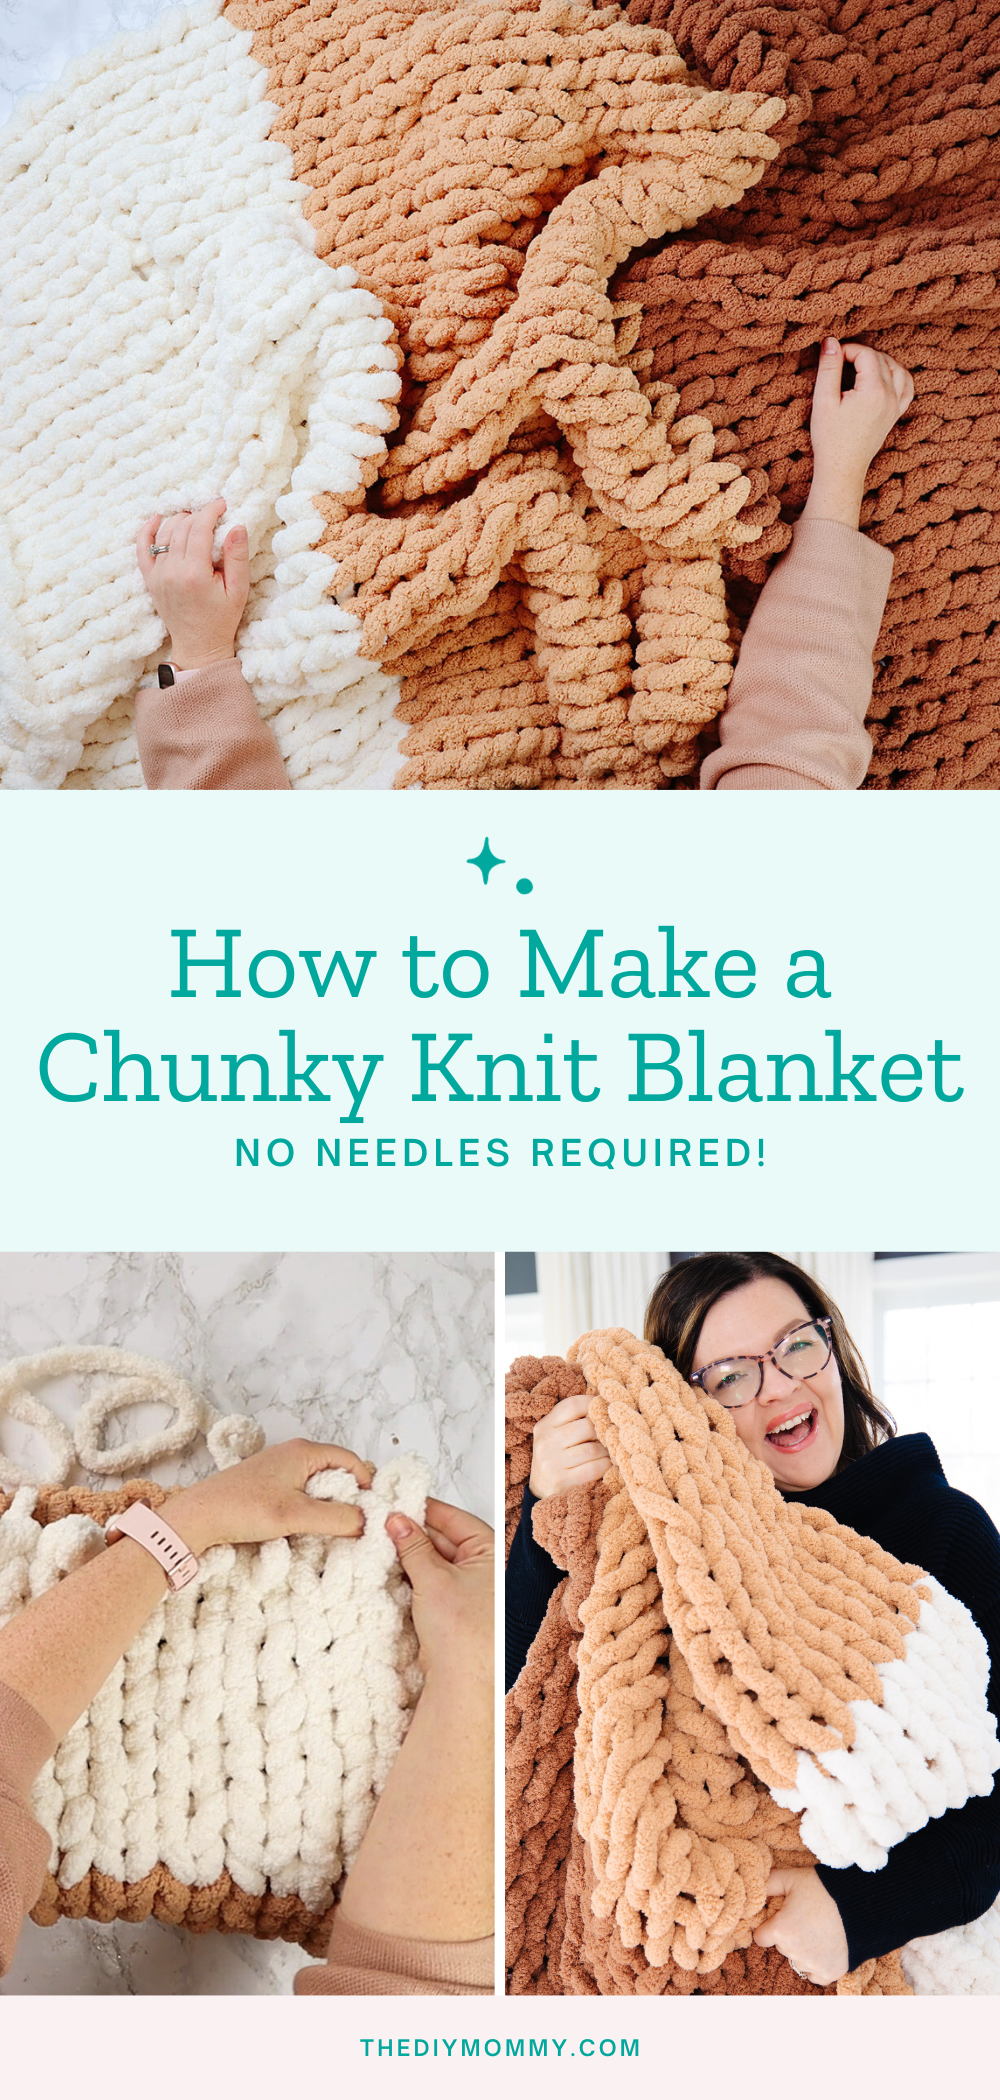 Learn how to make a gorgeous, plush knit blanket with no knitting needles required!